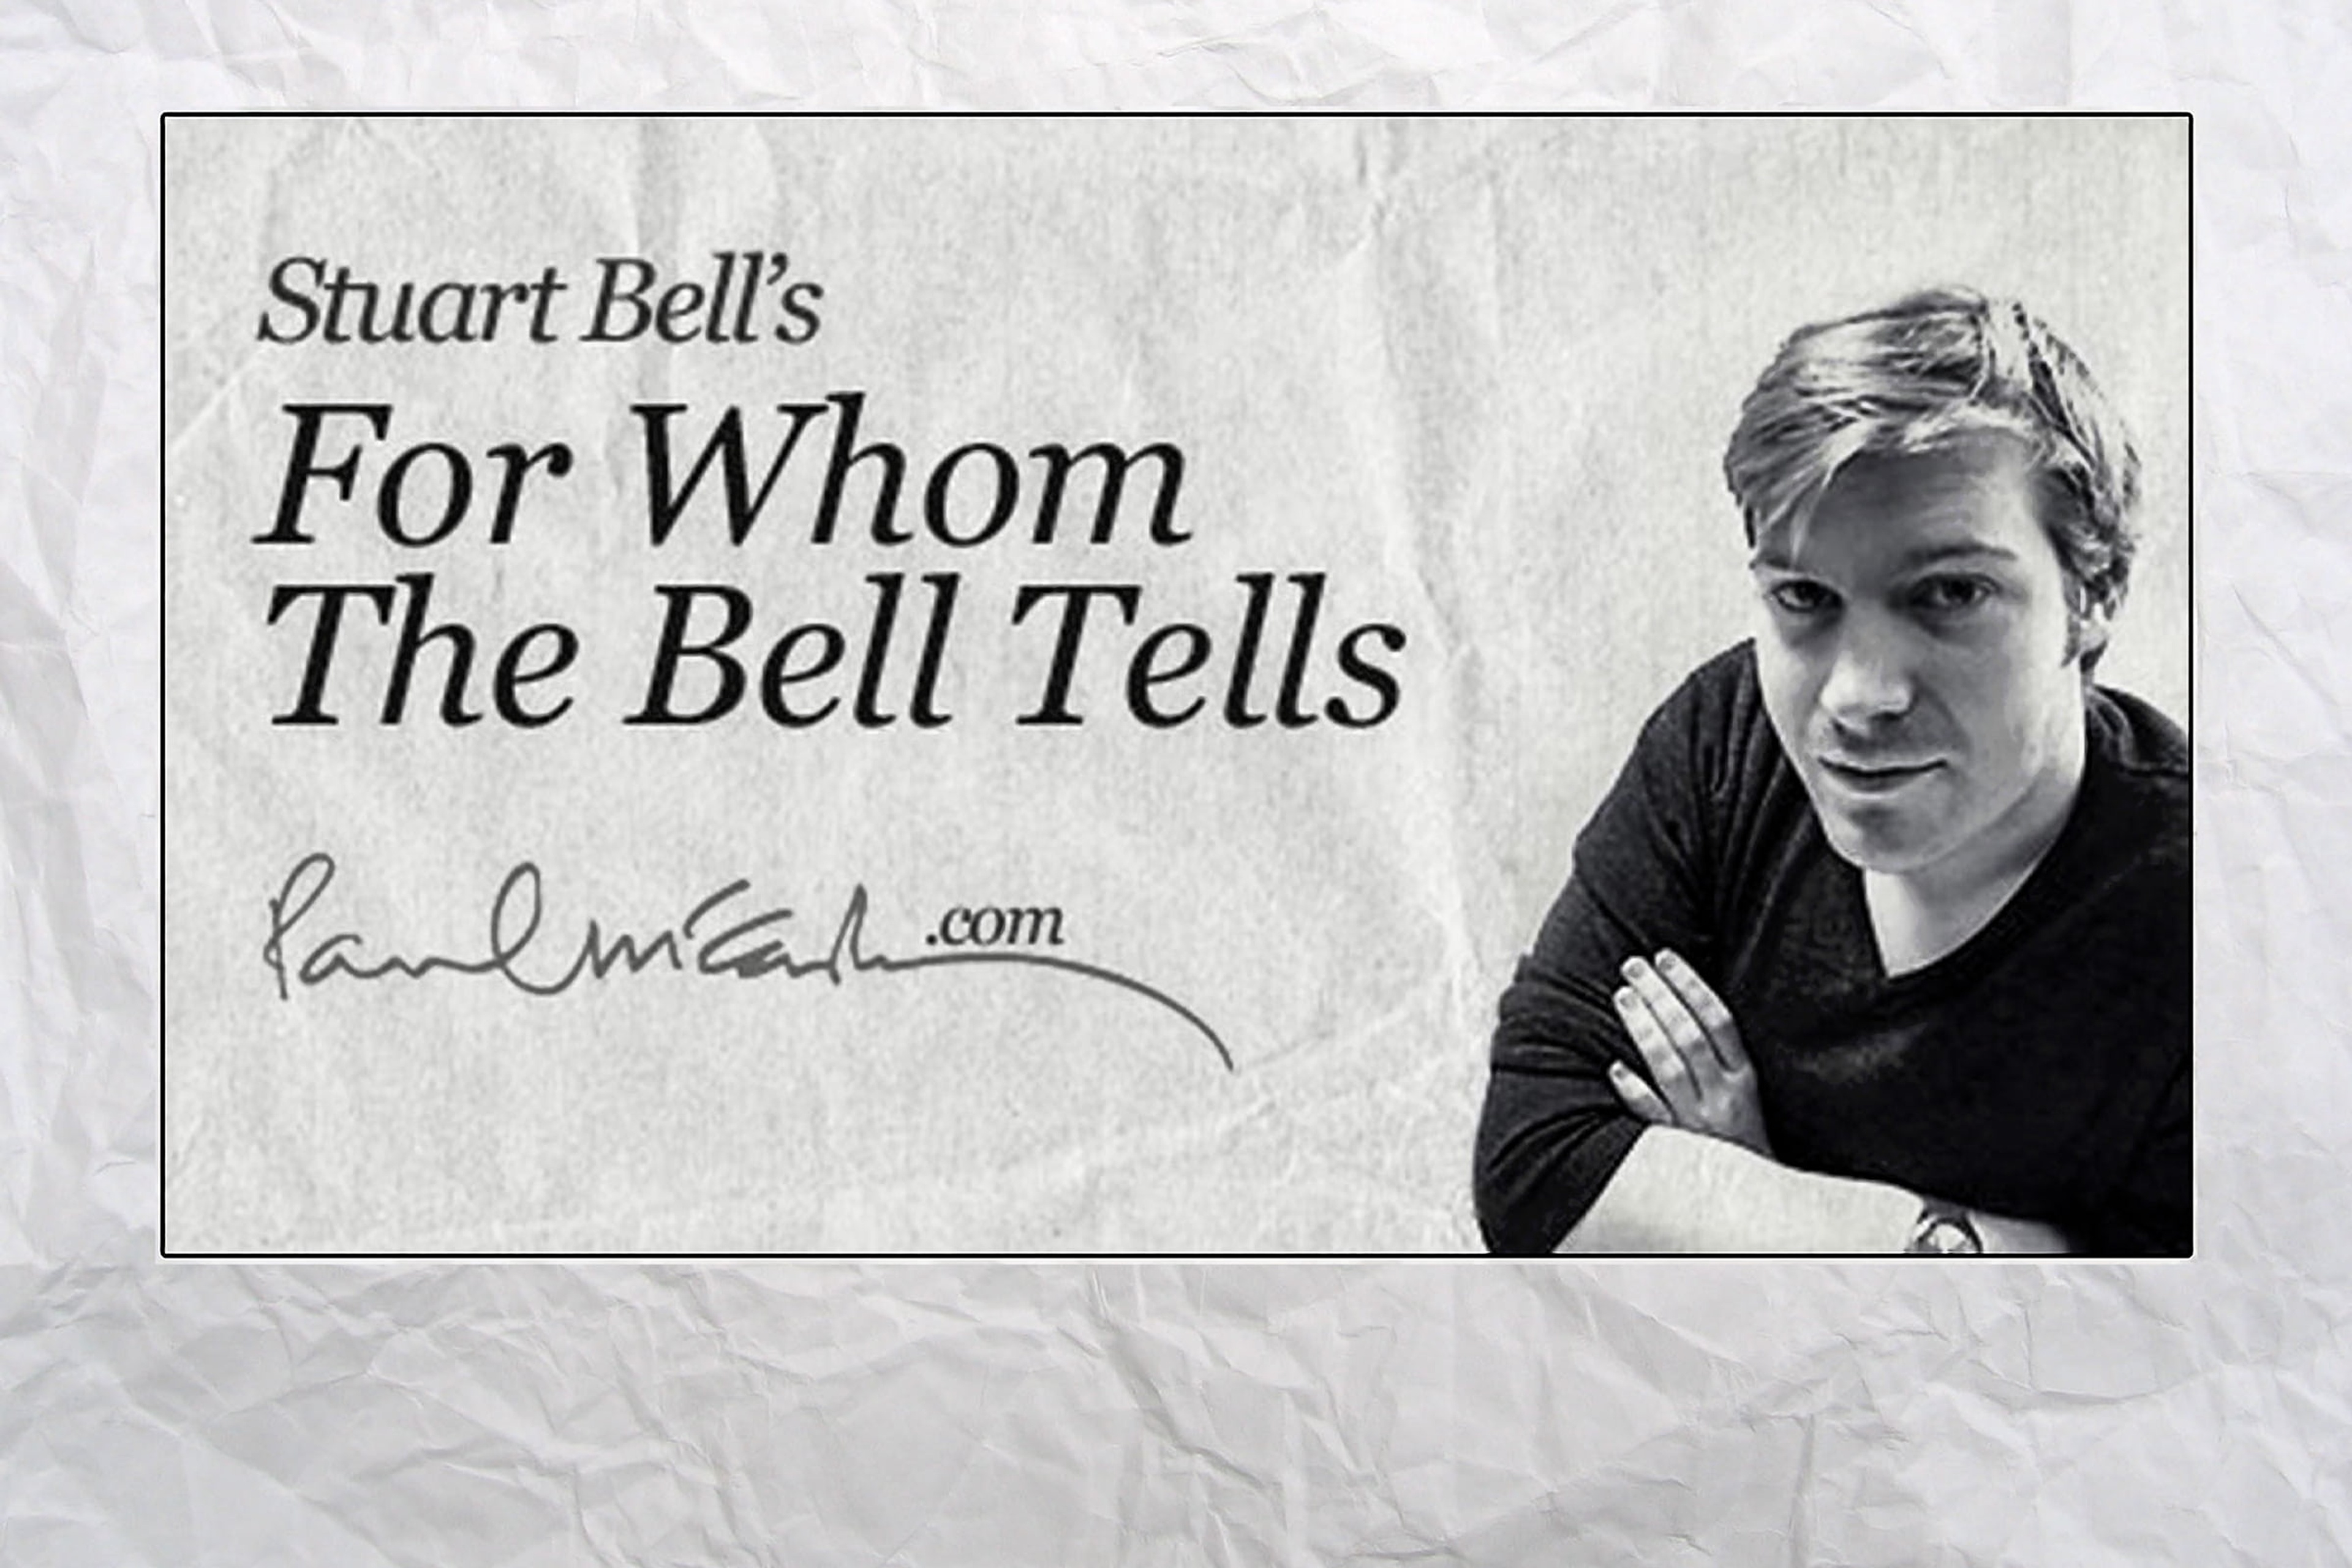 Photo of Paul's publicist Stuart Bell with the graphic "Stuart Bell's For Whom The Bell Tells"